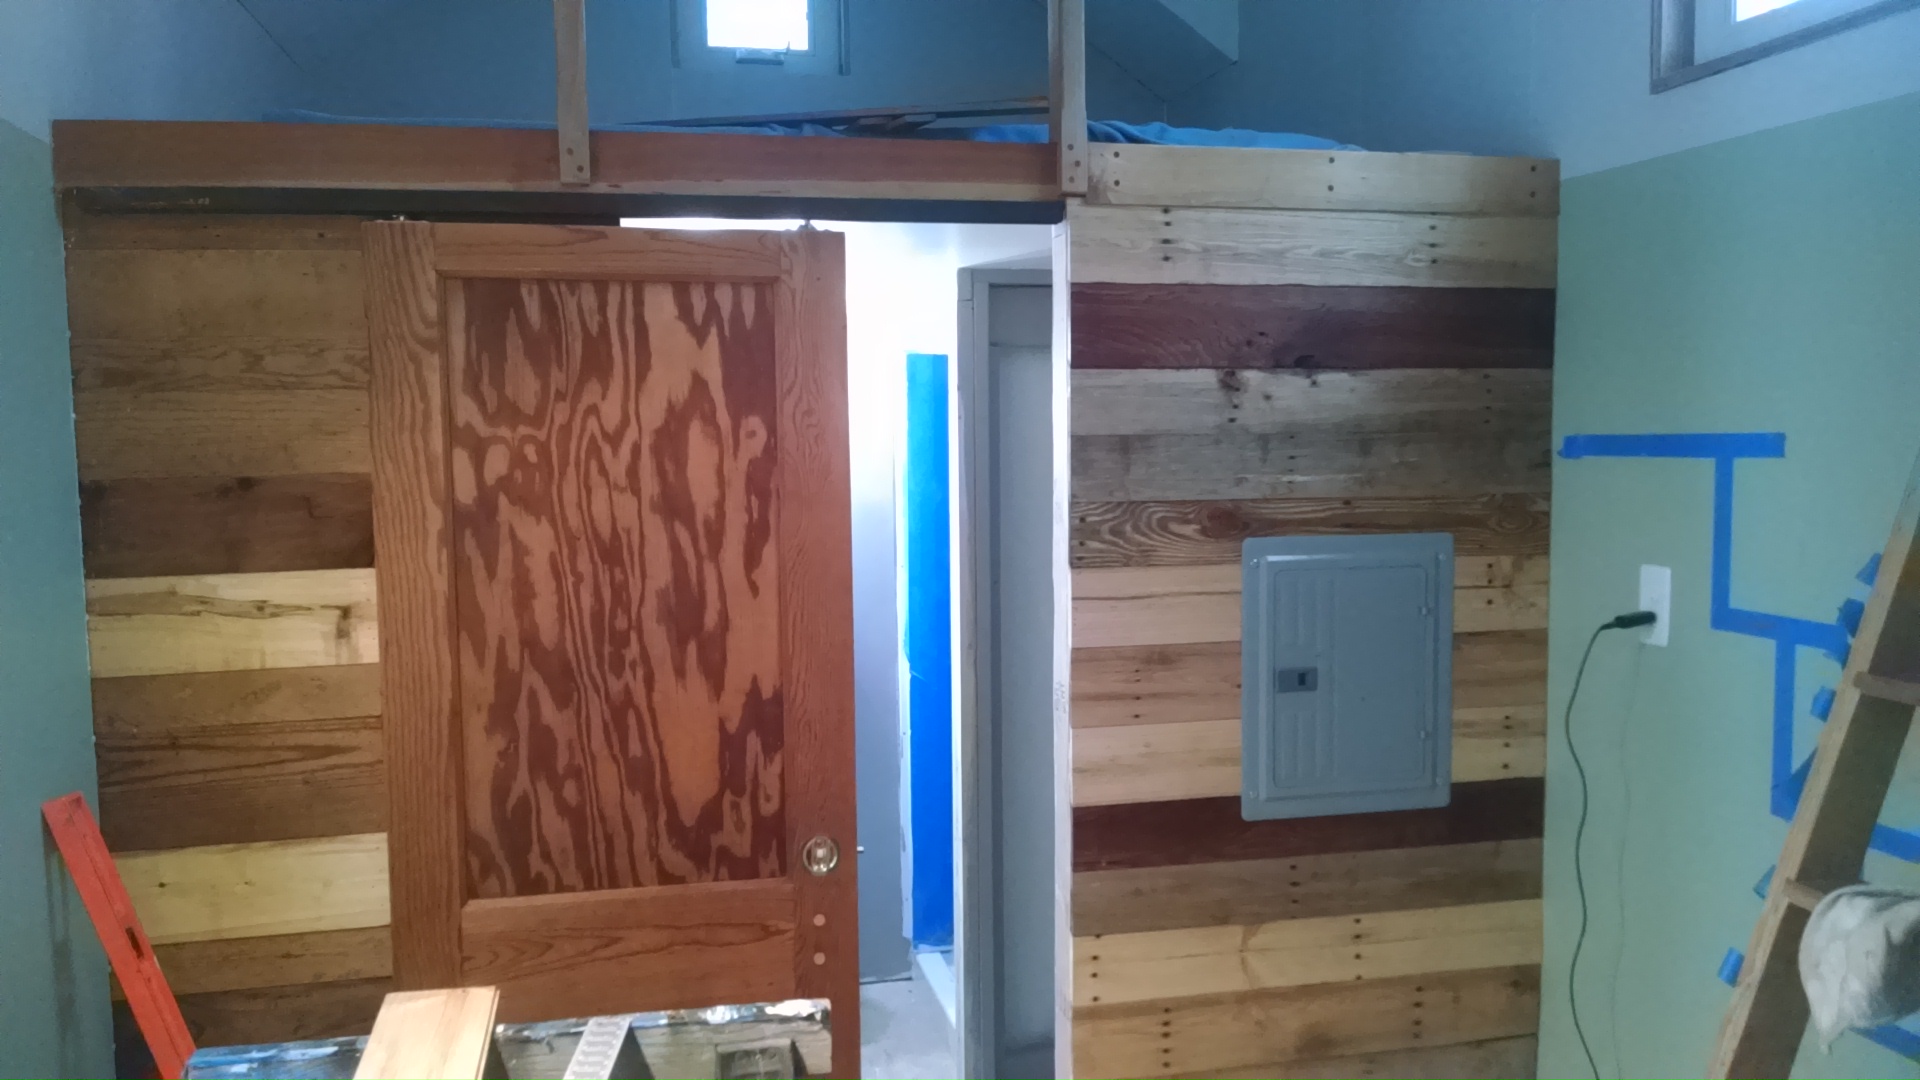 the second side of my bathroom wall is done, so I finally got to put on the cover for my breaker box; there will be a closet and alternating tread stairs in front of it